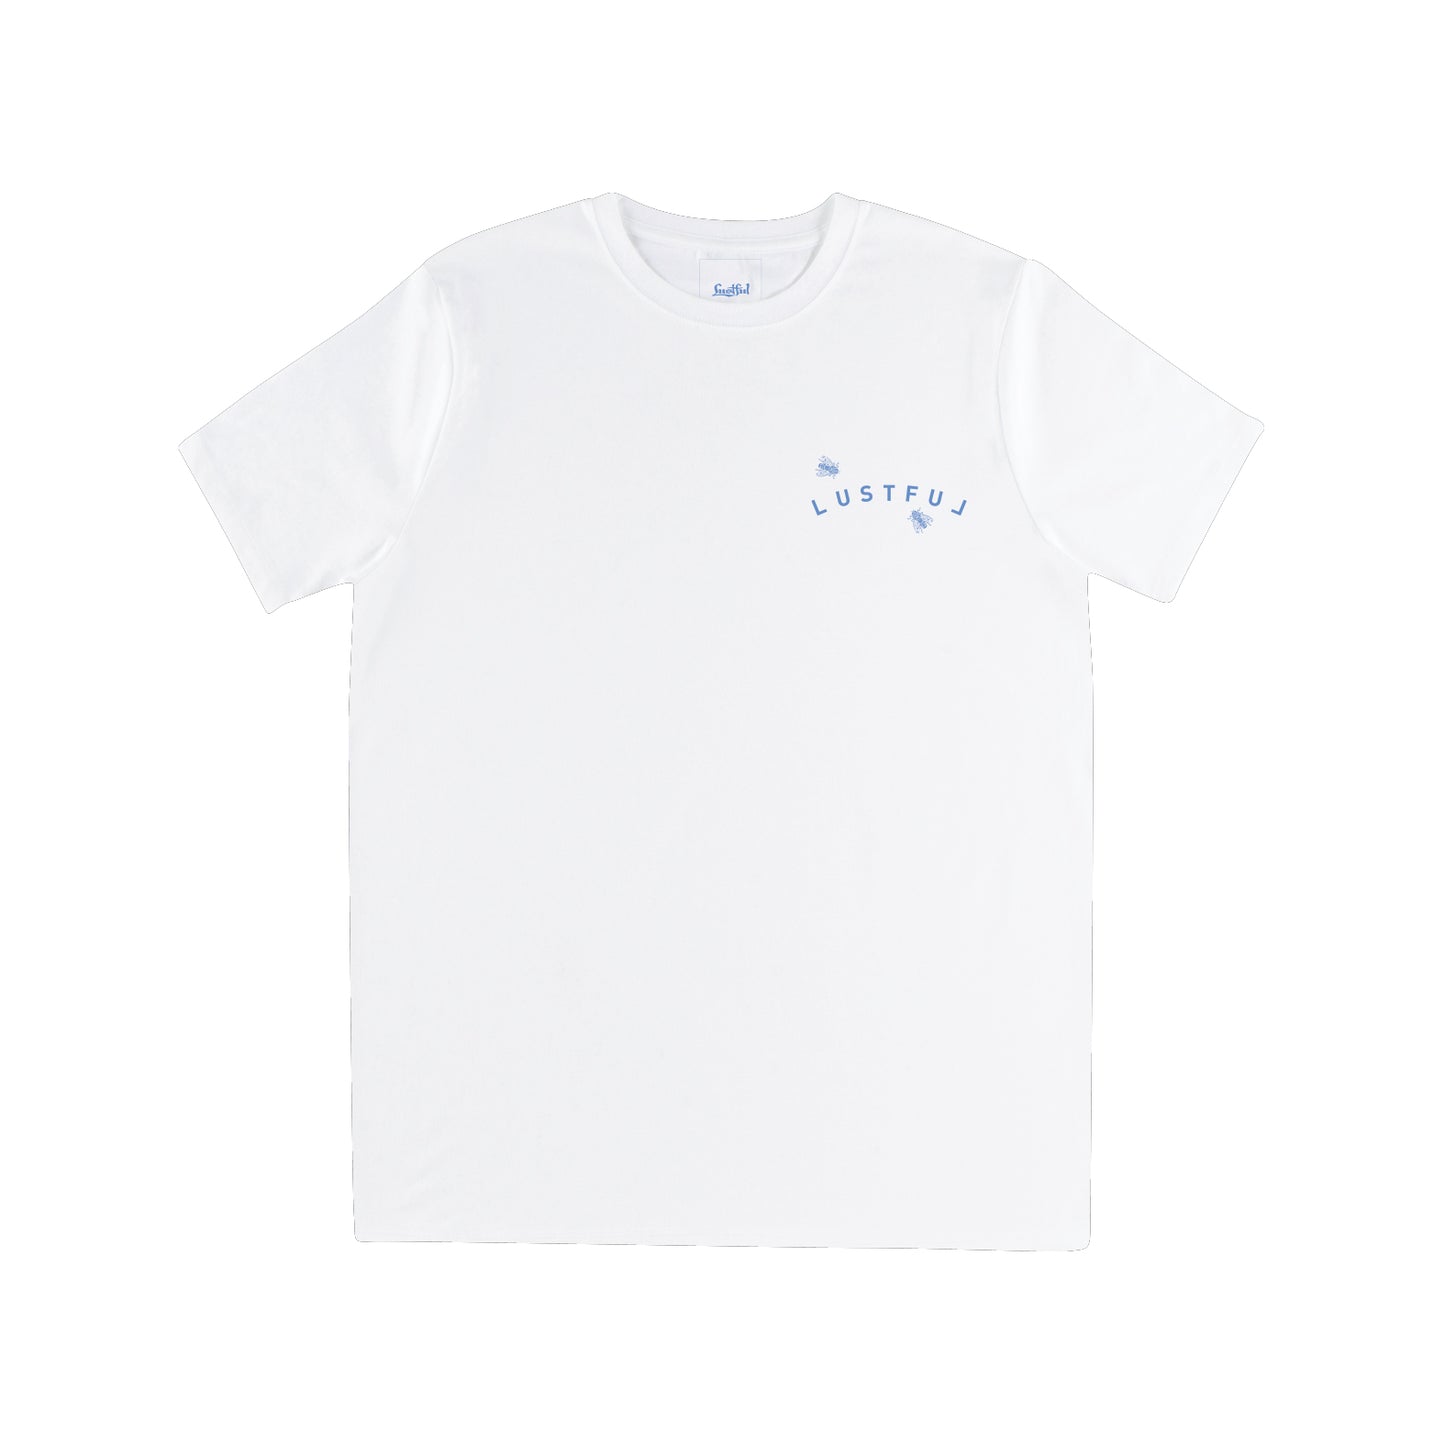 Bug T-shirt in white